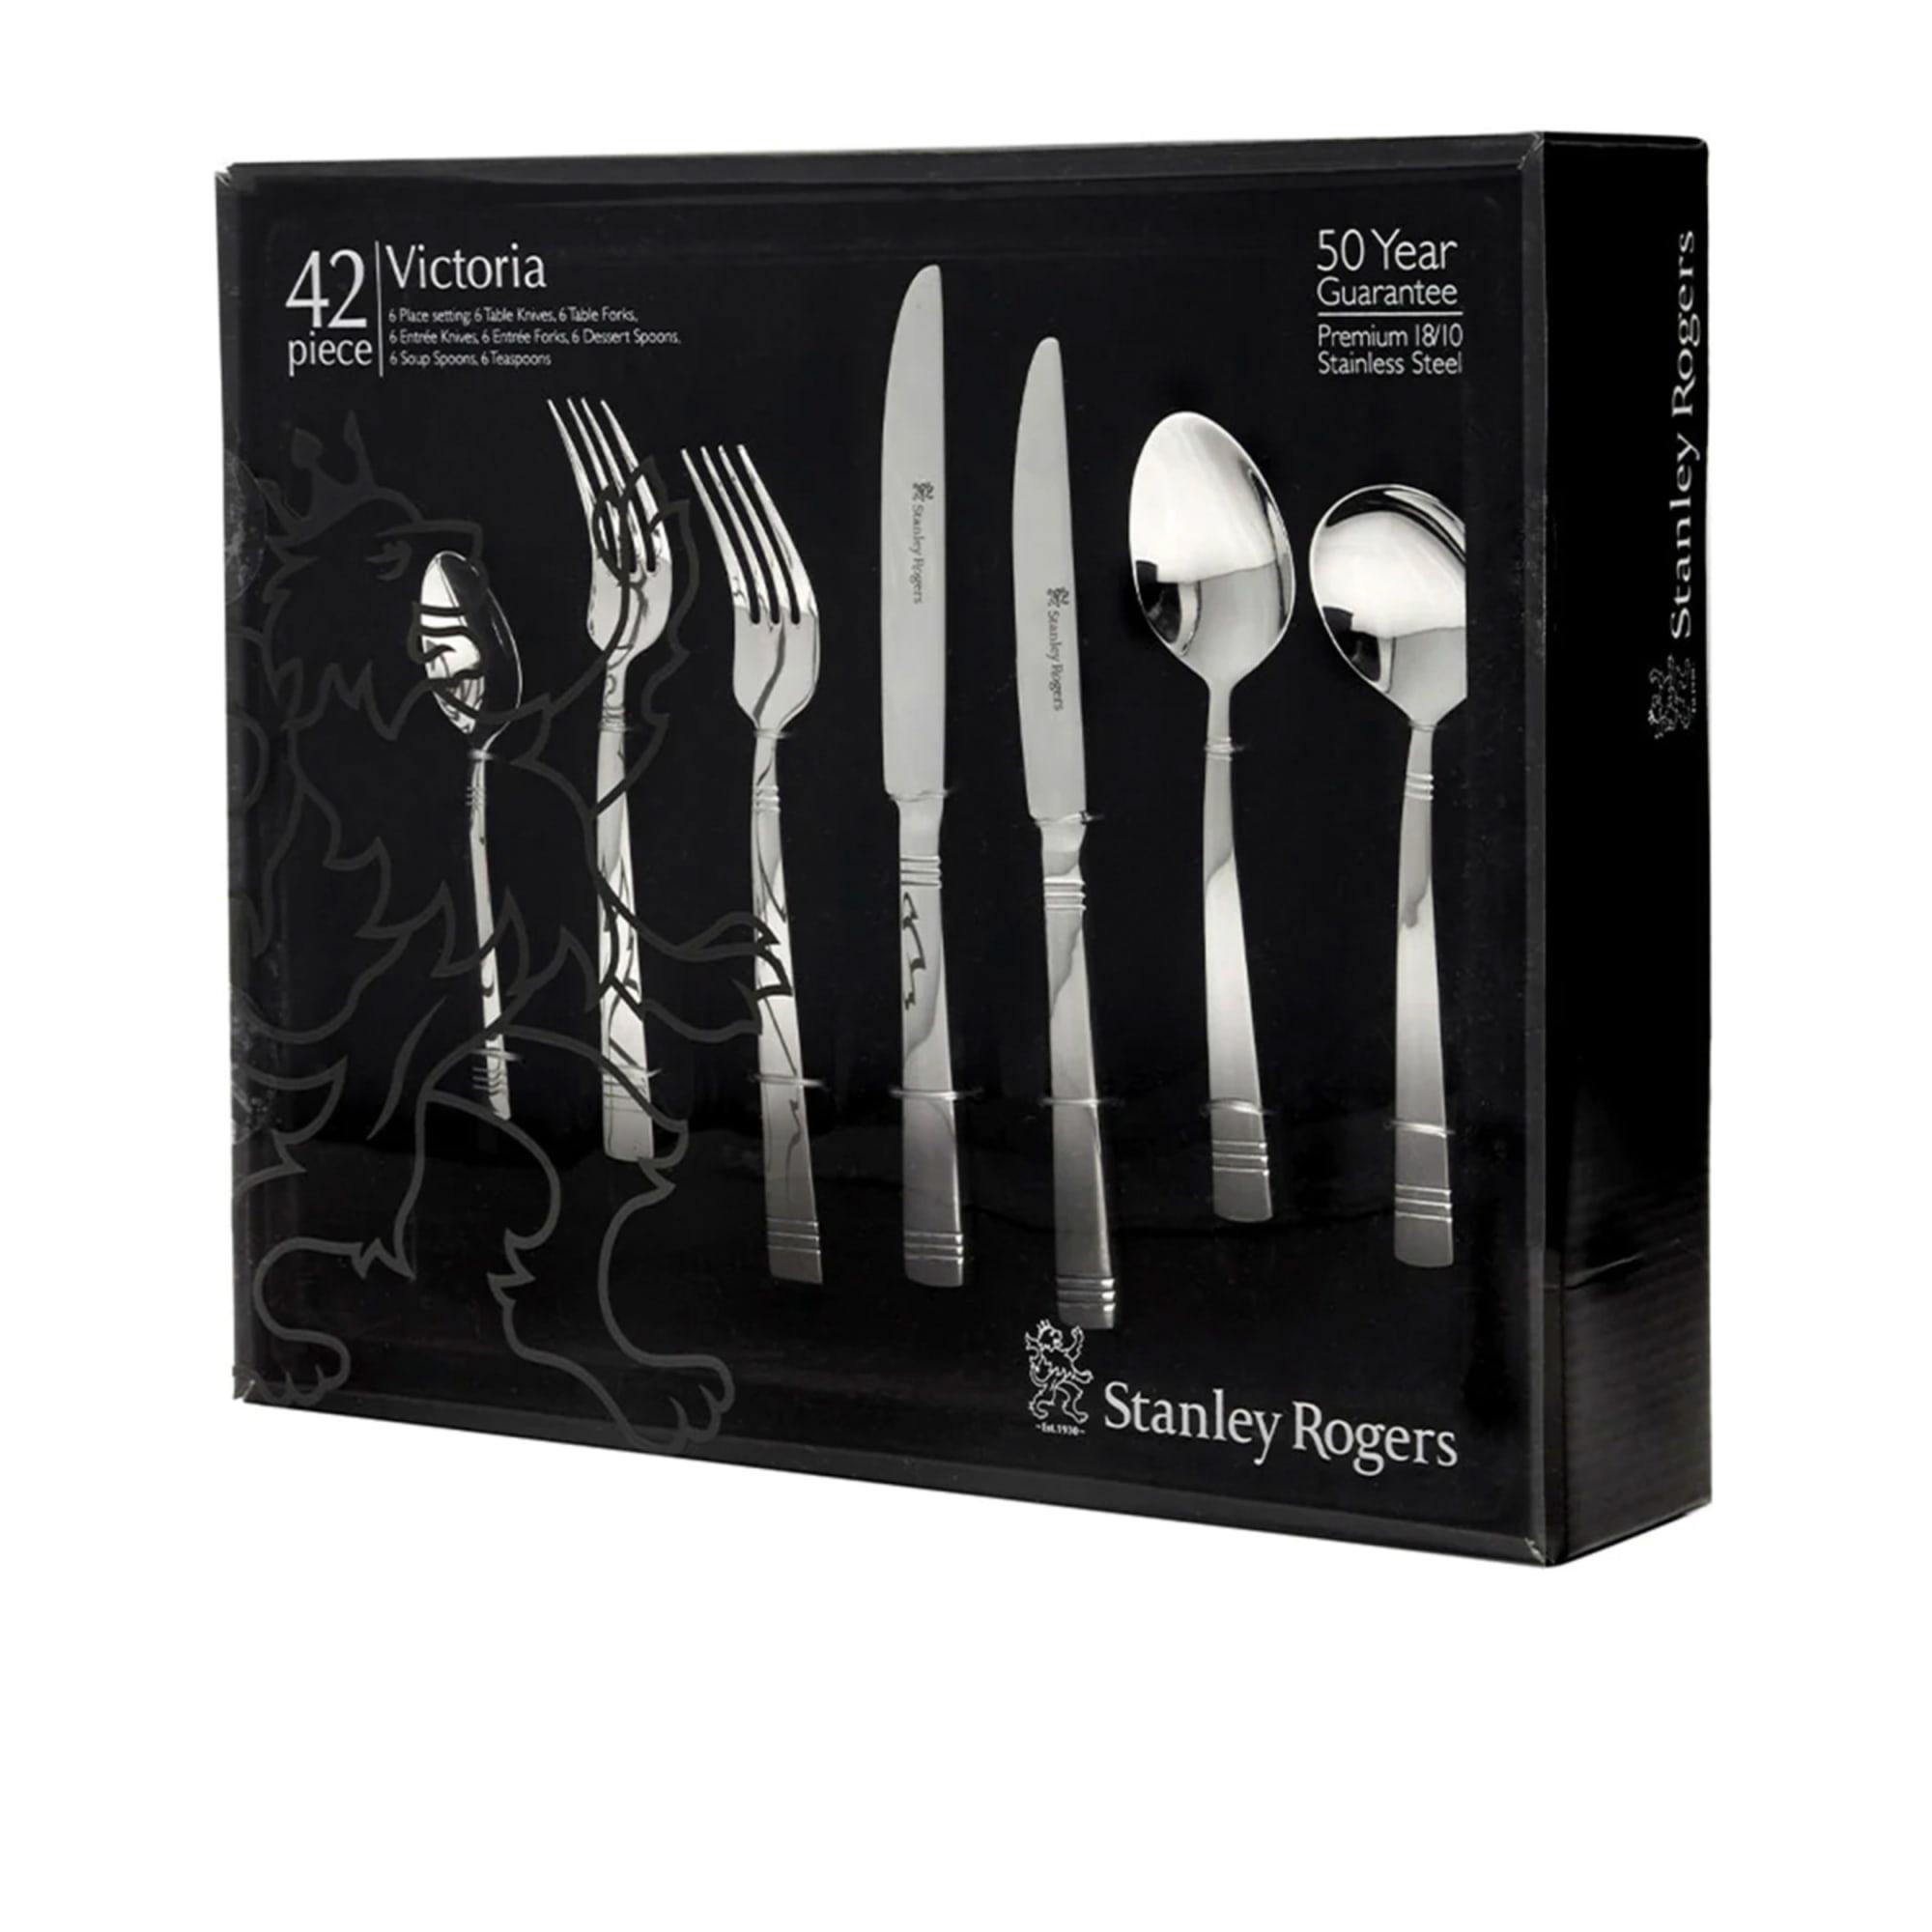 Stanley Rogers Victoria Cutlery Set 42pc Image 5